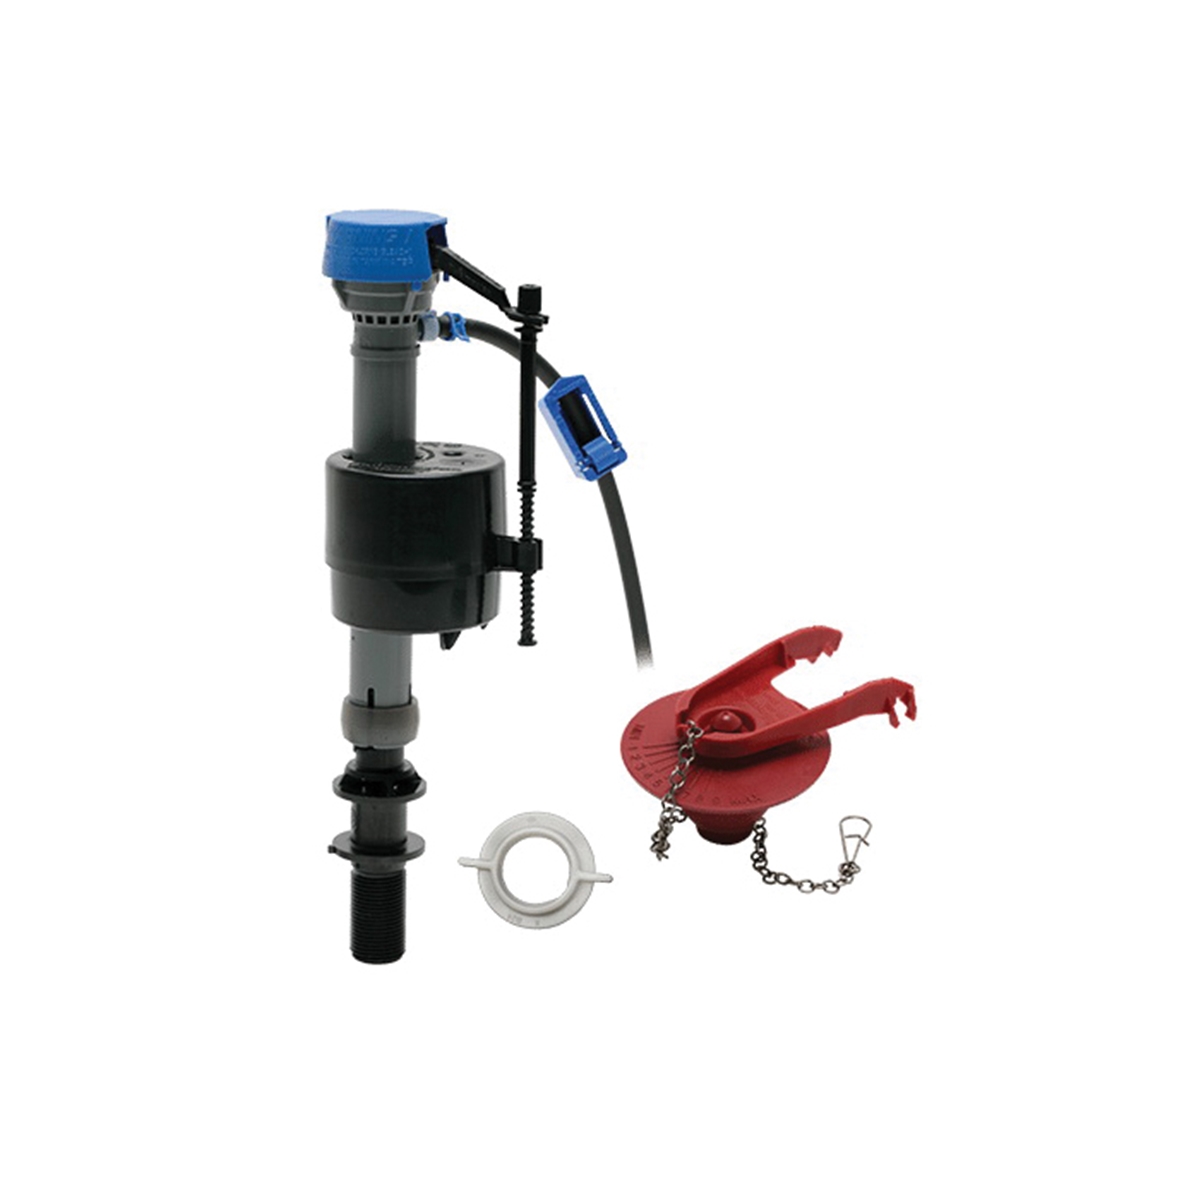 PerforMAX PRO Series 402CARHRP14 All-In-One Kit, 1.28, 1.6 gpf, Plastic Body, Multi-Color, Anti-Siphon: Yes